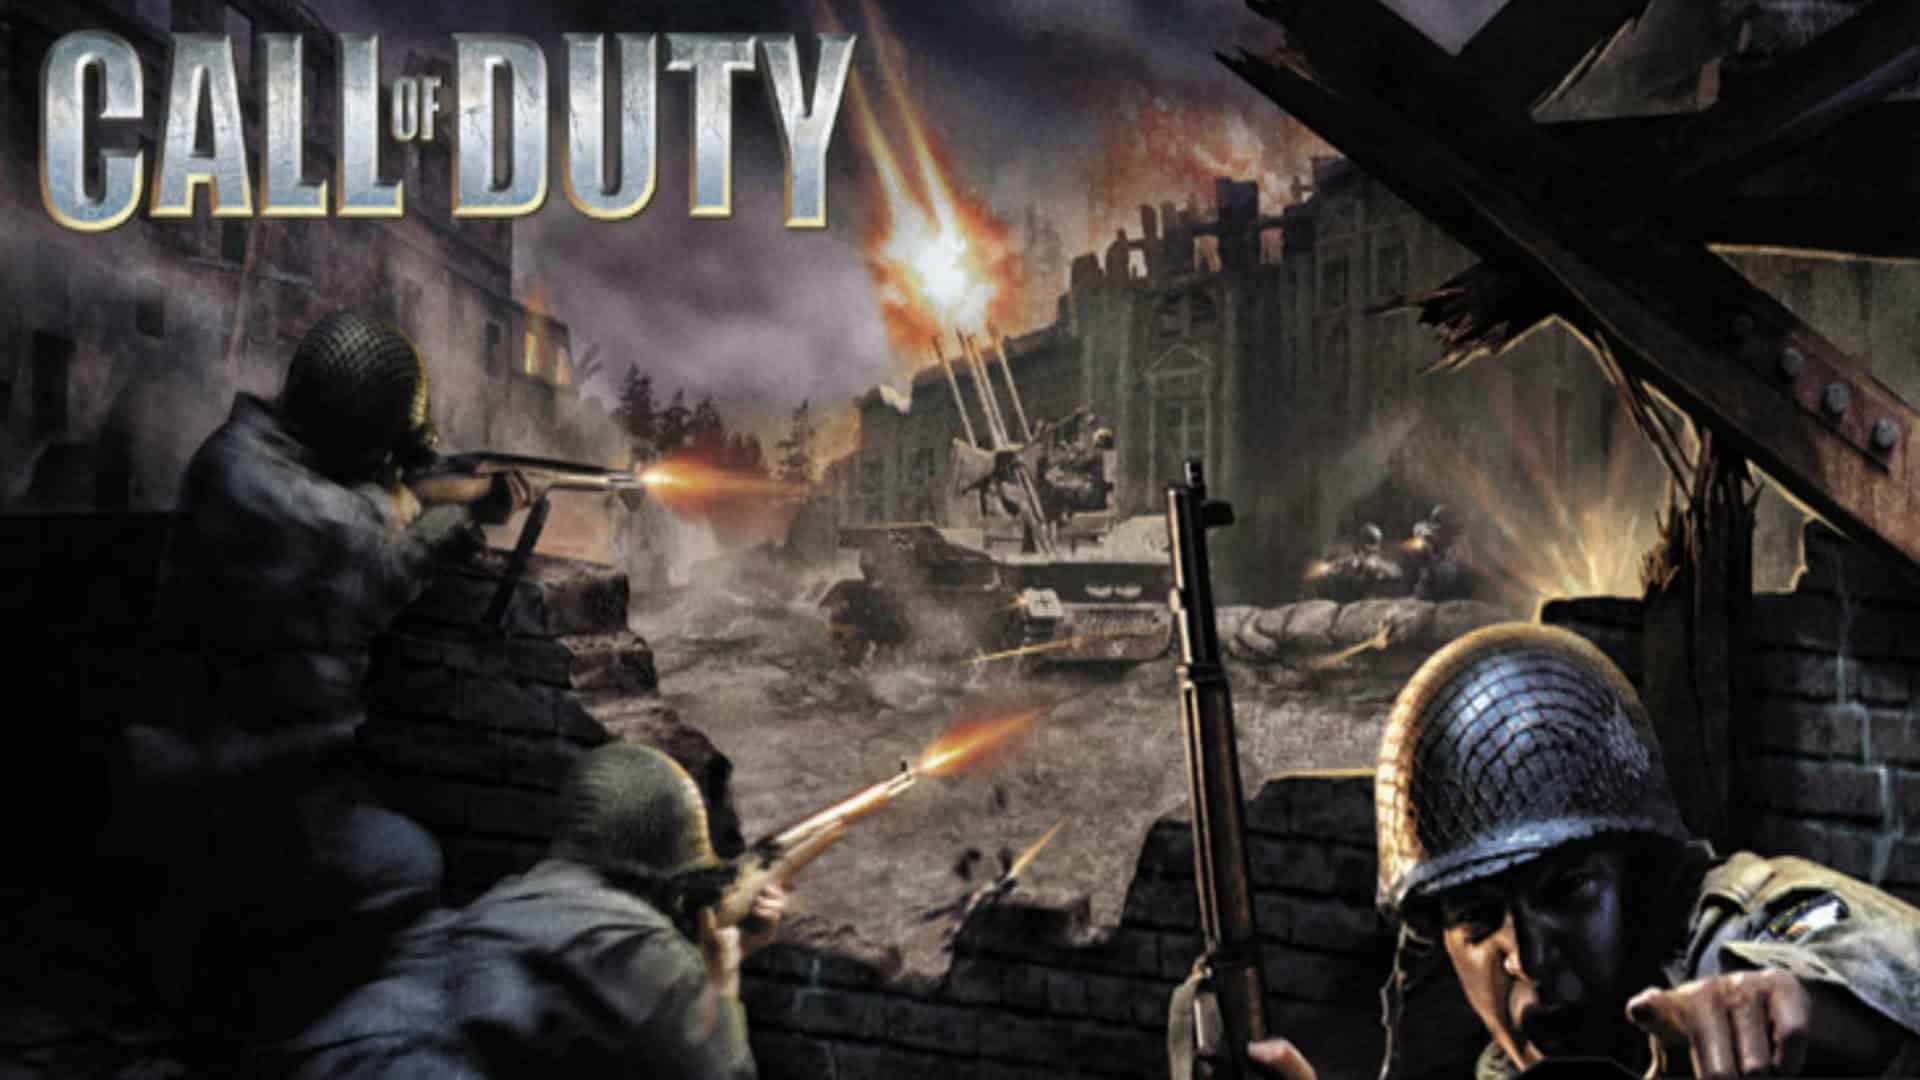 Best Call of Duty Games - Call of Duty 1